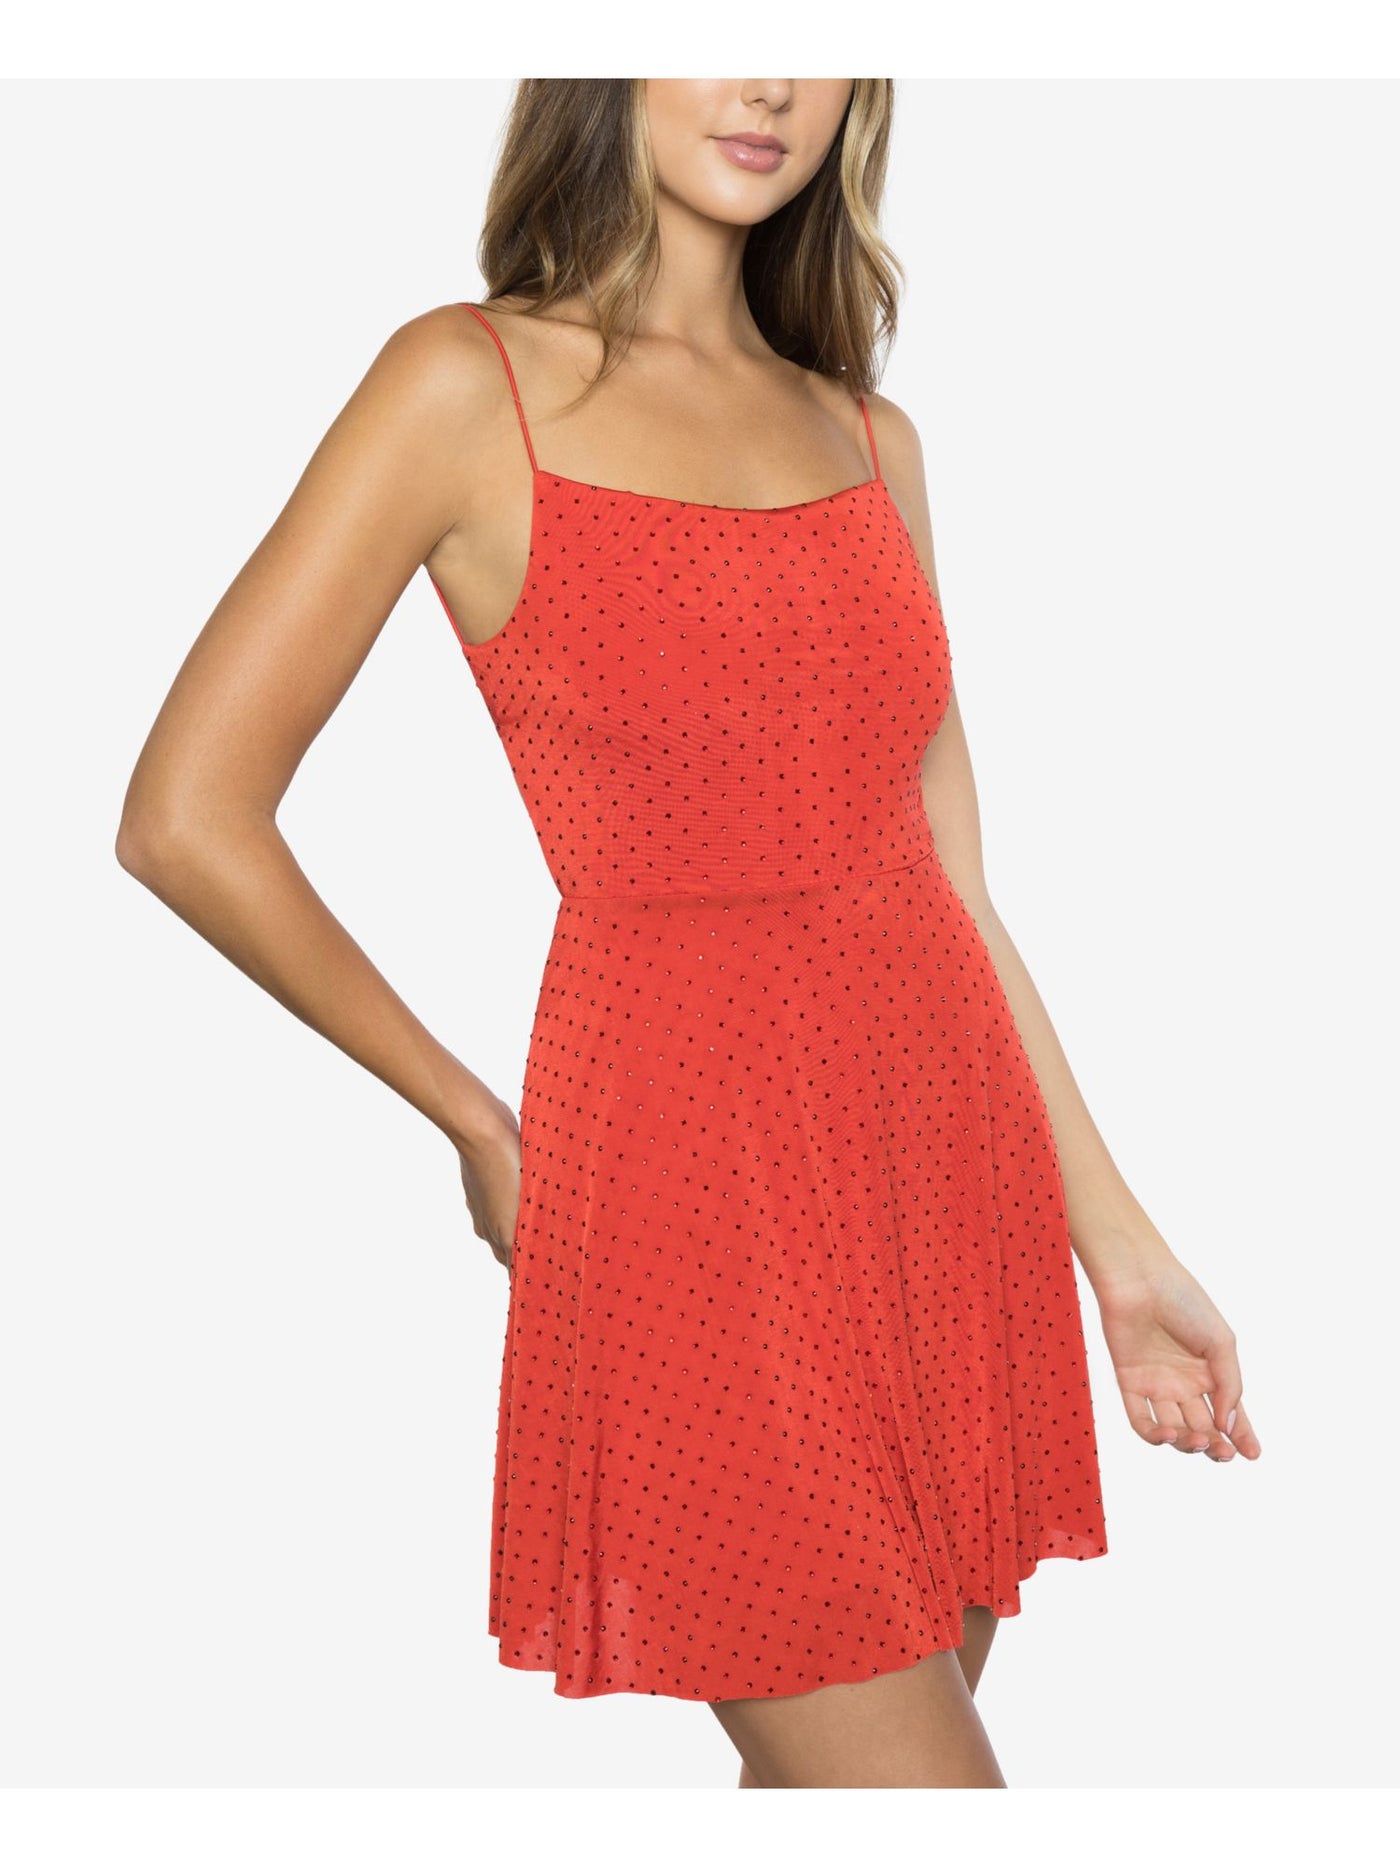 B DARLIN Womens Red Embellished Spaghetti Strap Square Neck Short Party A-Line Dress Juniors 3\4